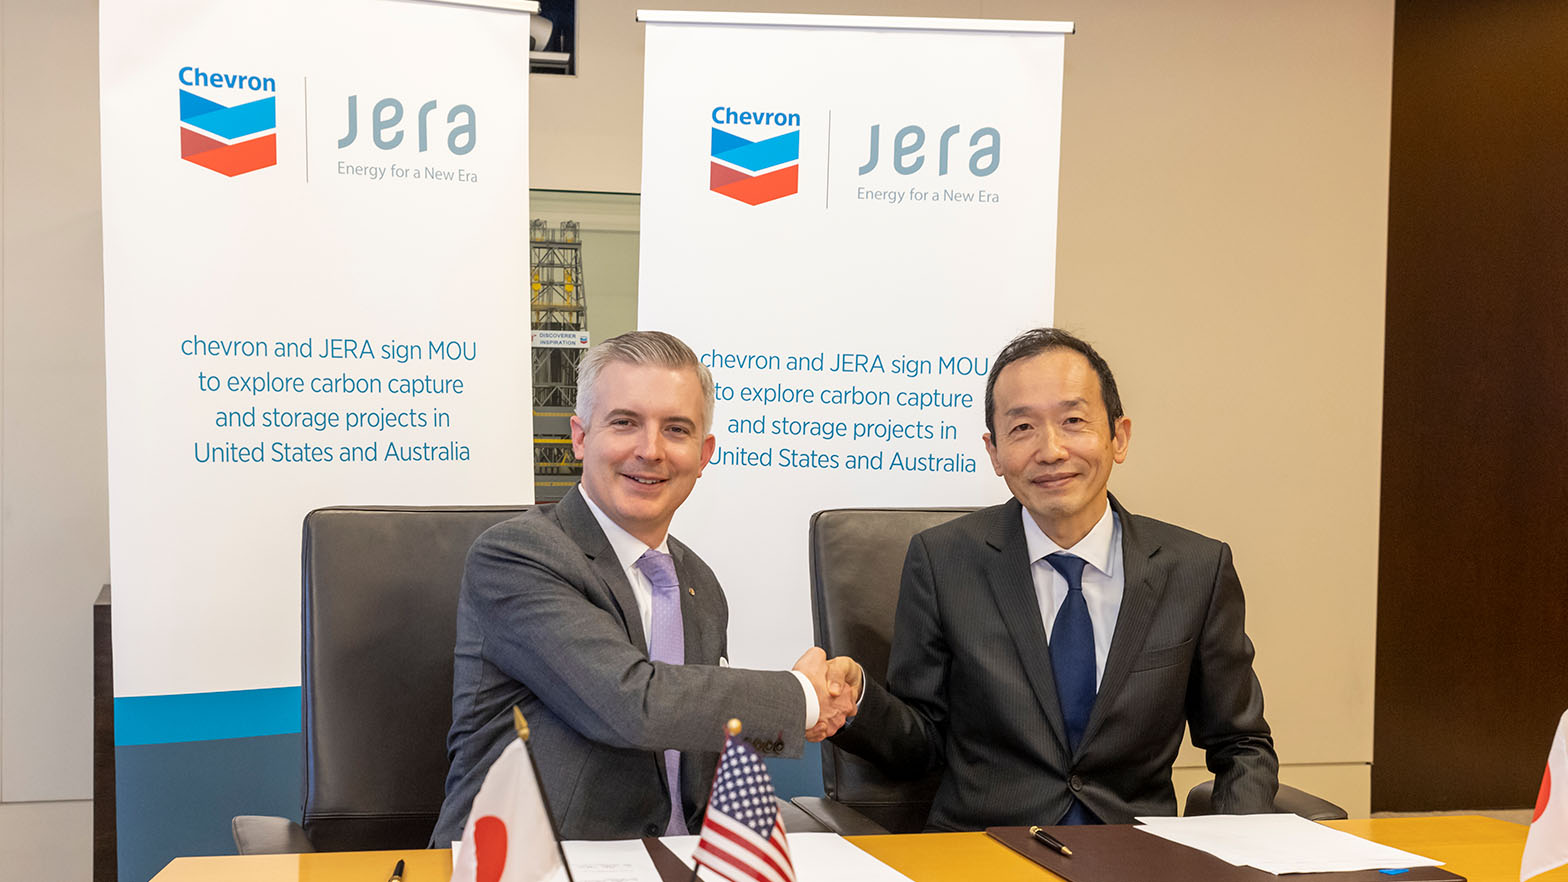 Chris Powers, Vice President of Carbon Capture Utilization and Storage at Chevron. and Gaku Takagi, Executive Officer, Head of the Resource Procurement & Investment Division of JERA Co., Inc.